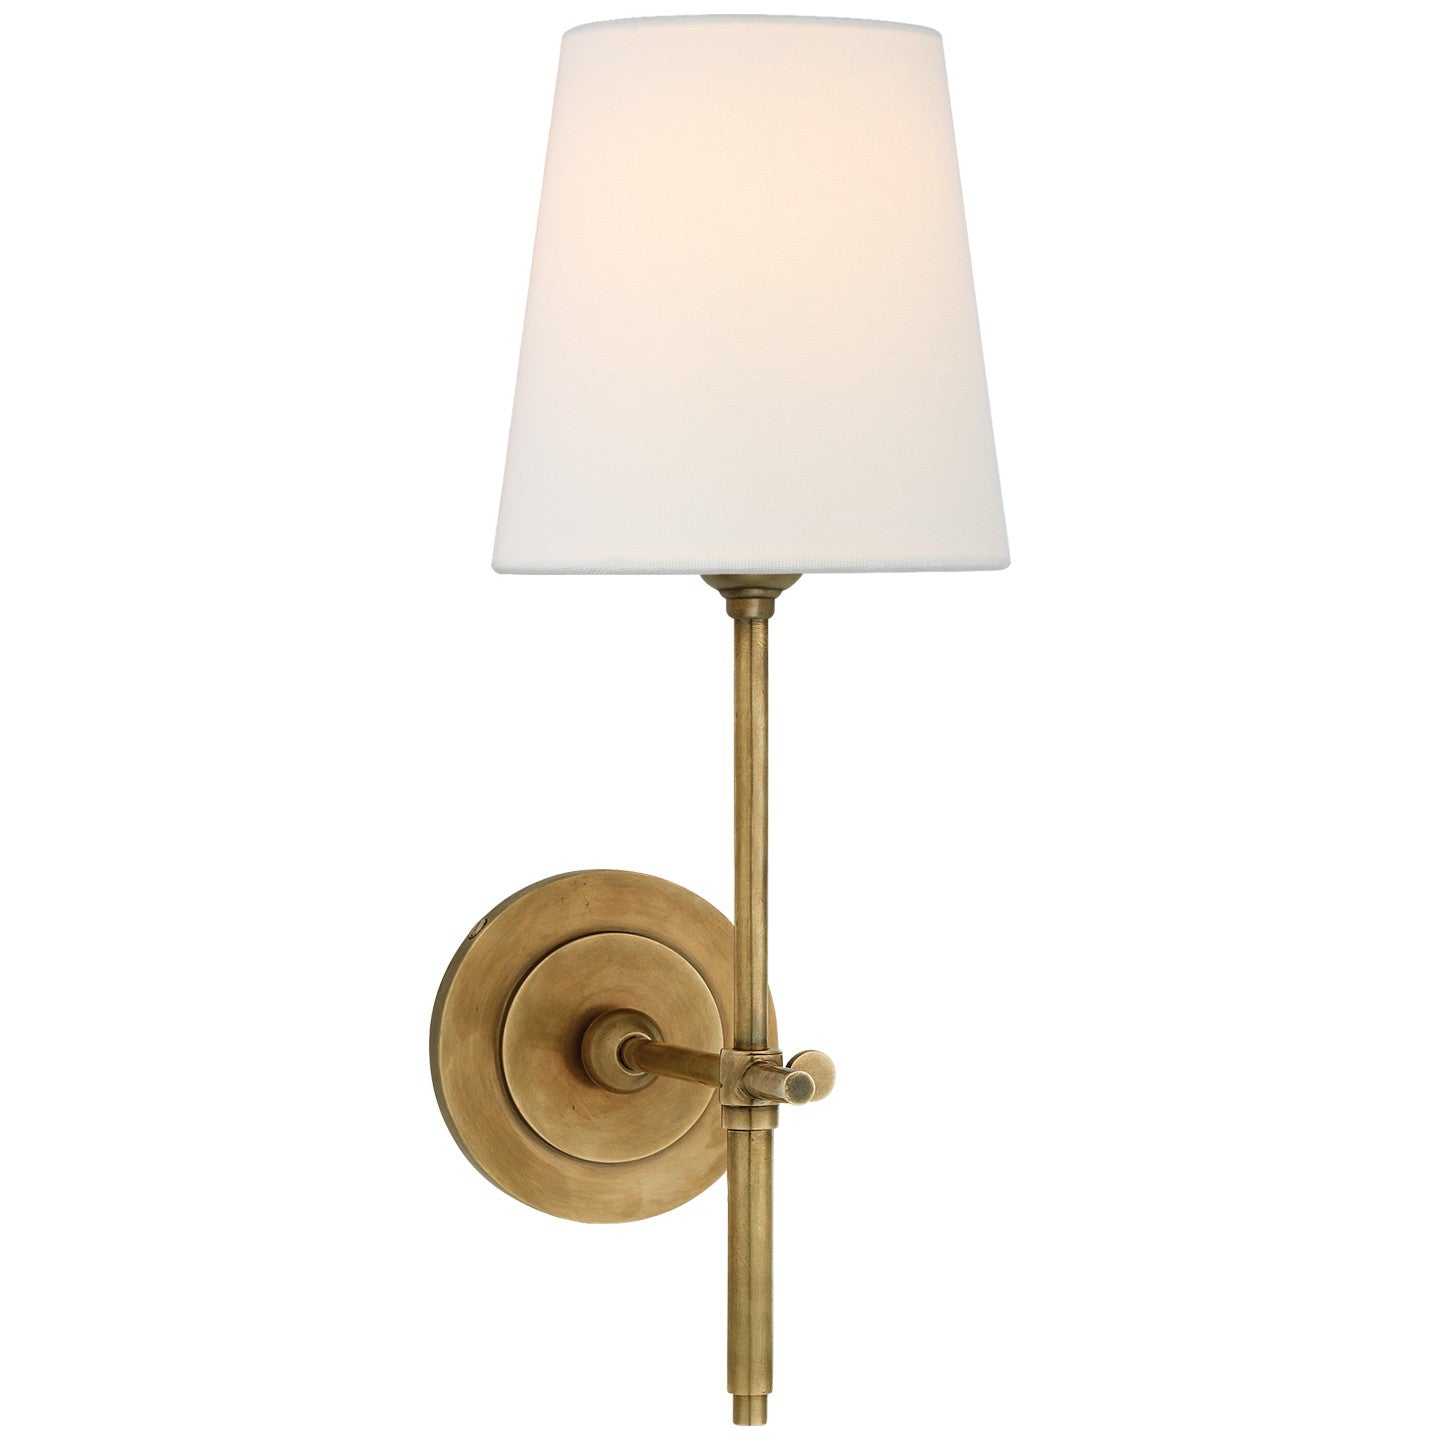 Visual Comfort Signature Canada - One Light Wall Sconce - Bryant - Hand-Rubbed Antique Brass- Union Lighting Luminaires Decor